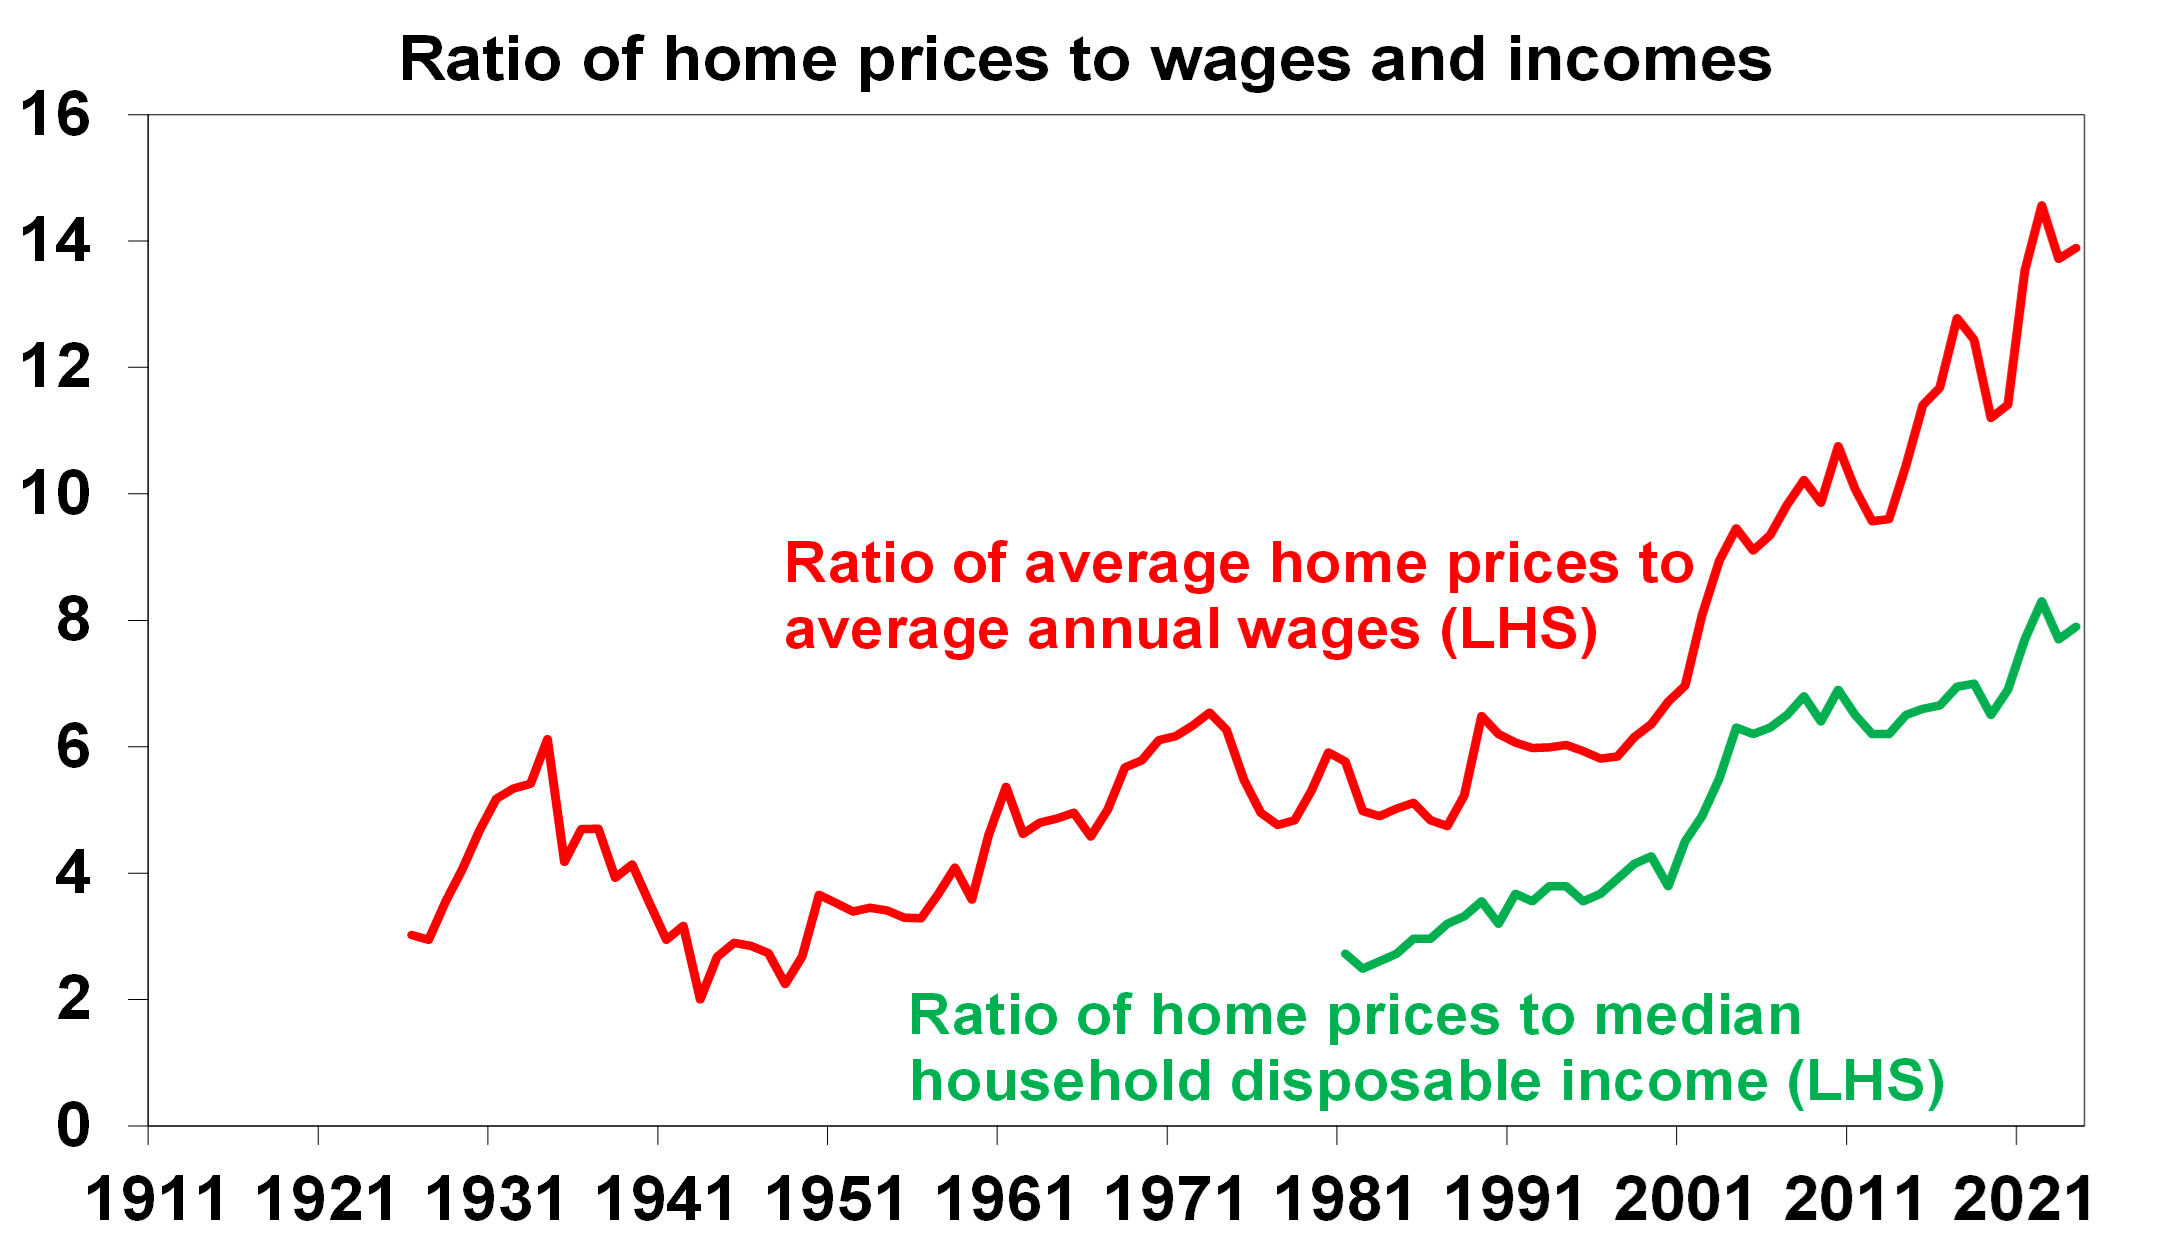 Ratio of home prices to wages and incomes